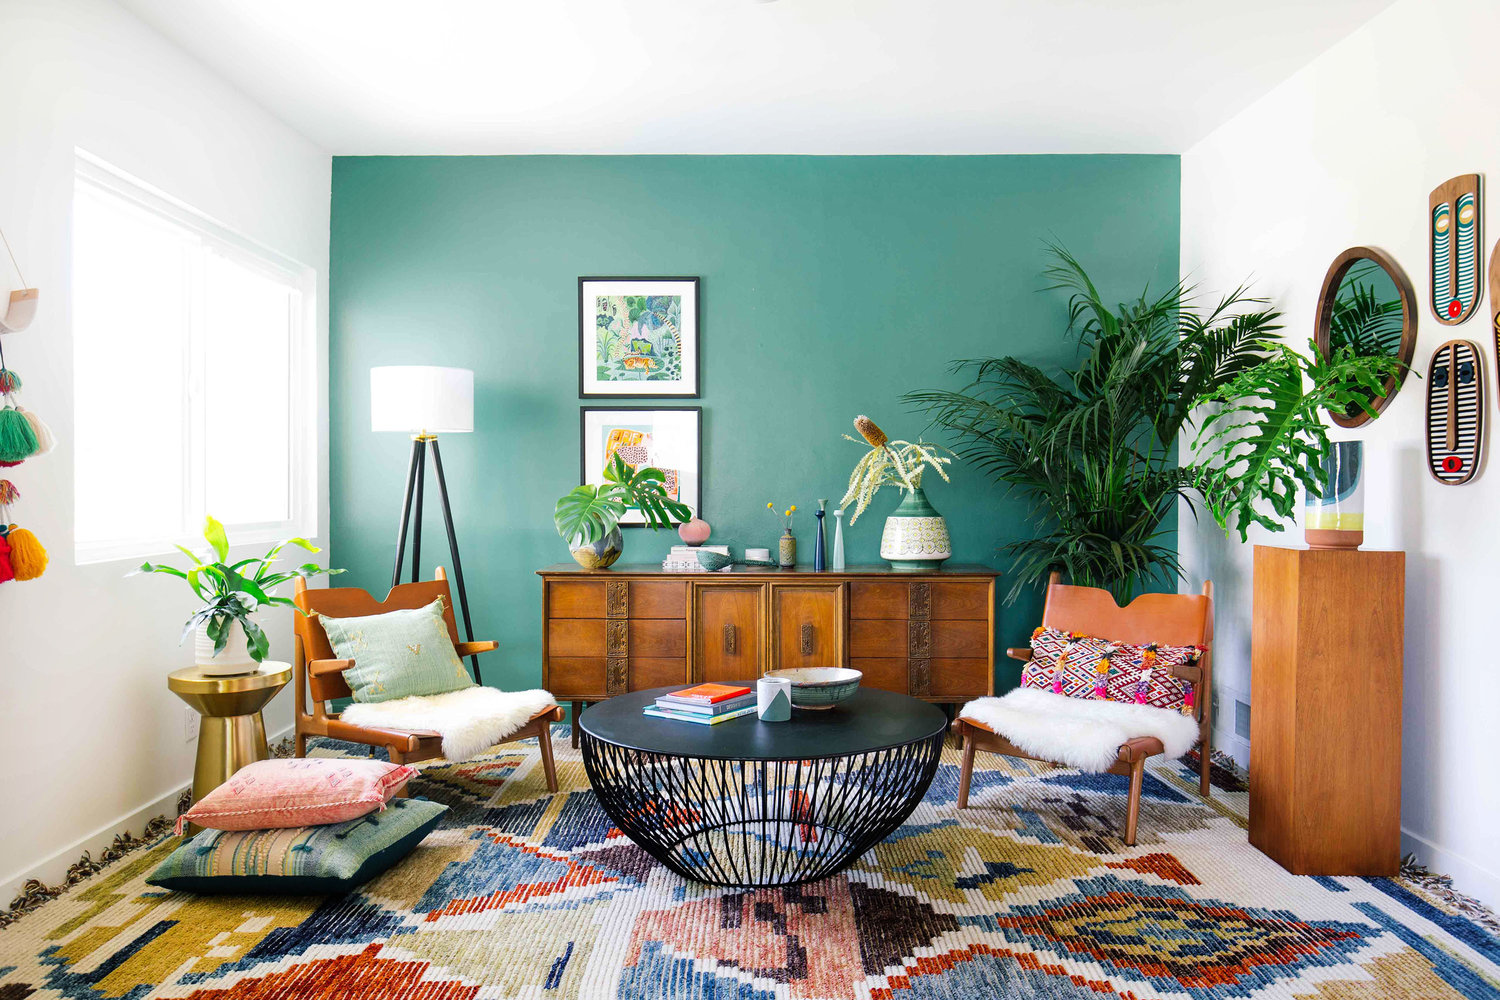 Living room with green walls and a colorful rug designed for a vibrant ambiance.